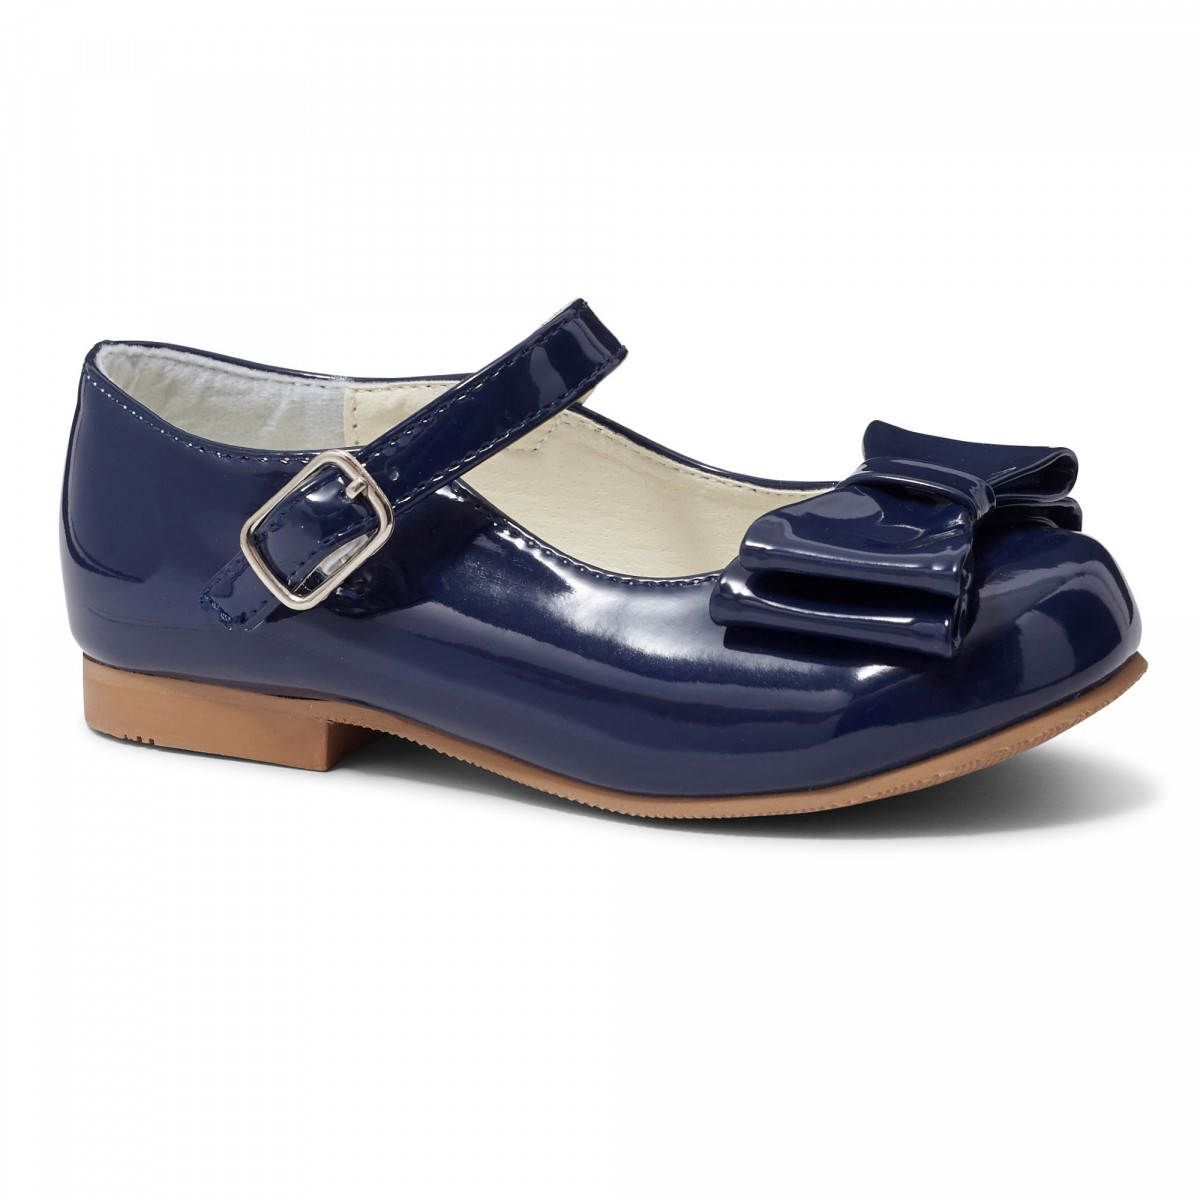 Girls Navy Patent Shoes | peacecommission.kdsg.gov.ng